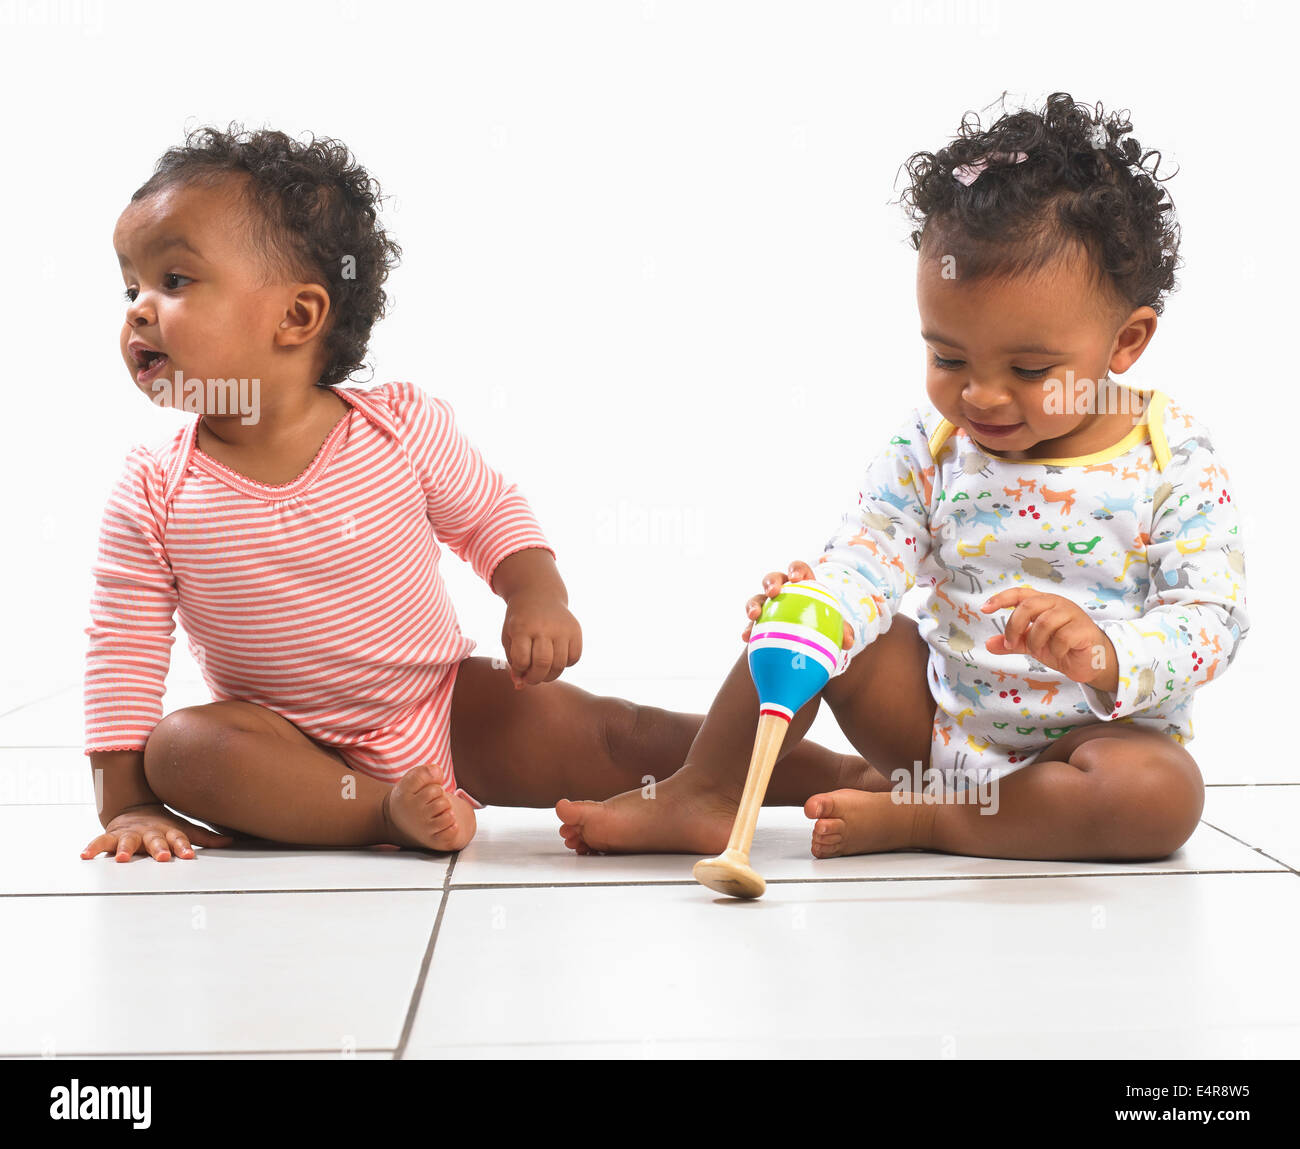 Twin boy and girl (18 months) sitting on floor, one holding a maraca Stock Photo